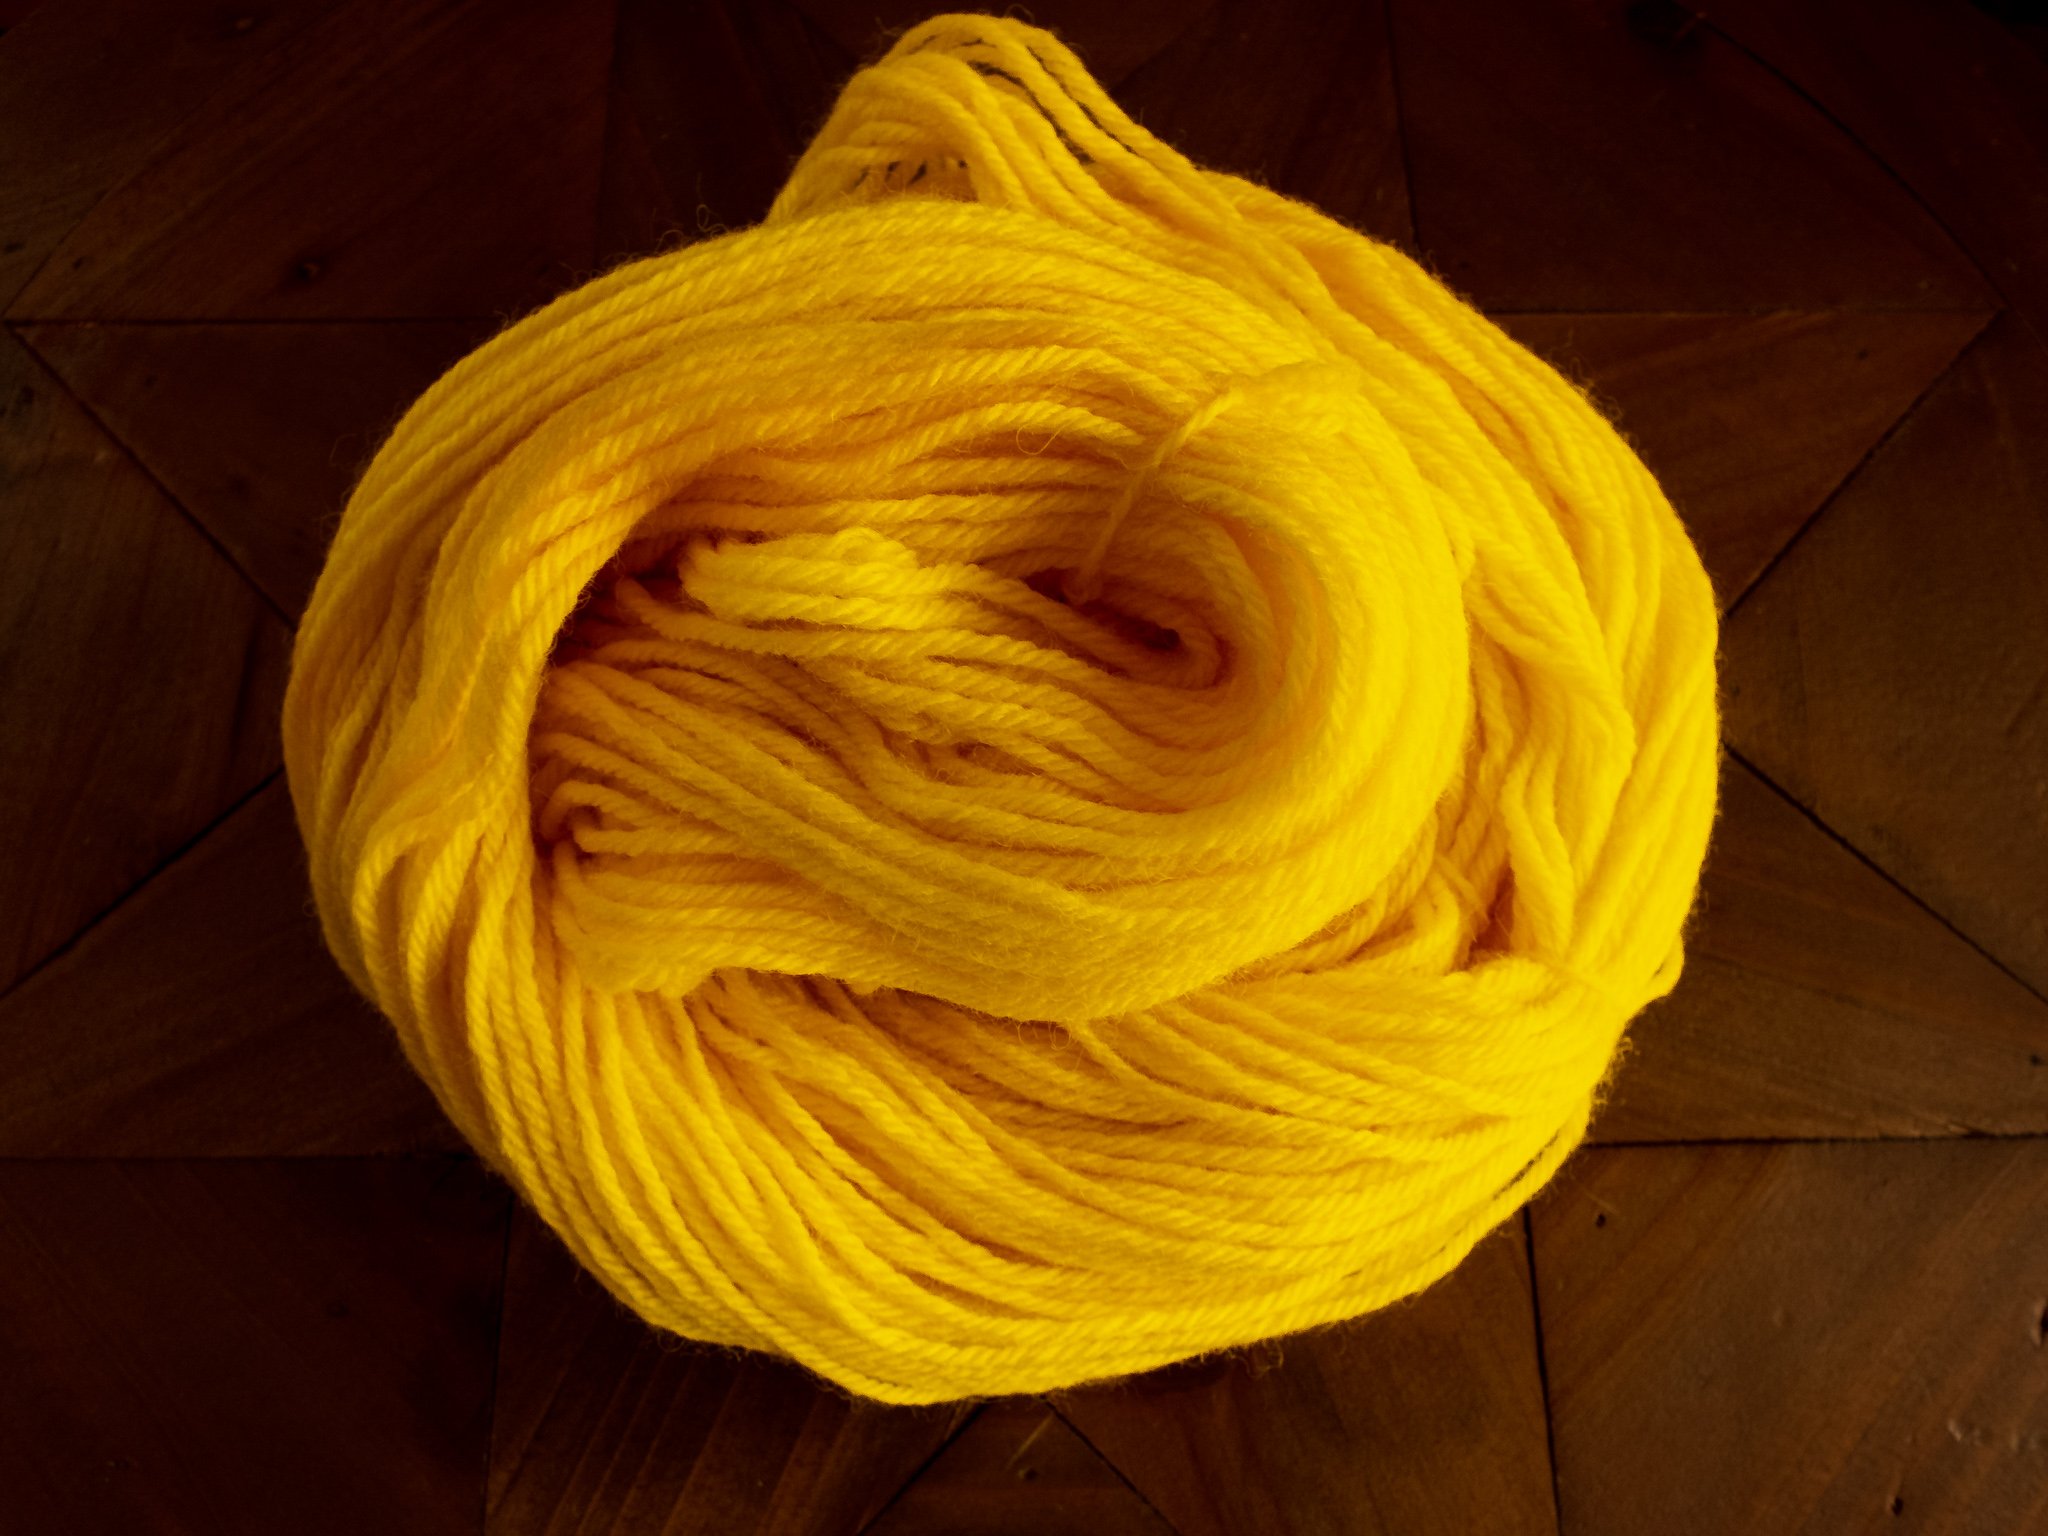 Our Icelandic Yarn, Hand-dyed Sport Weight – KNOLL FARM